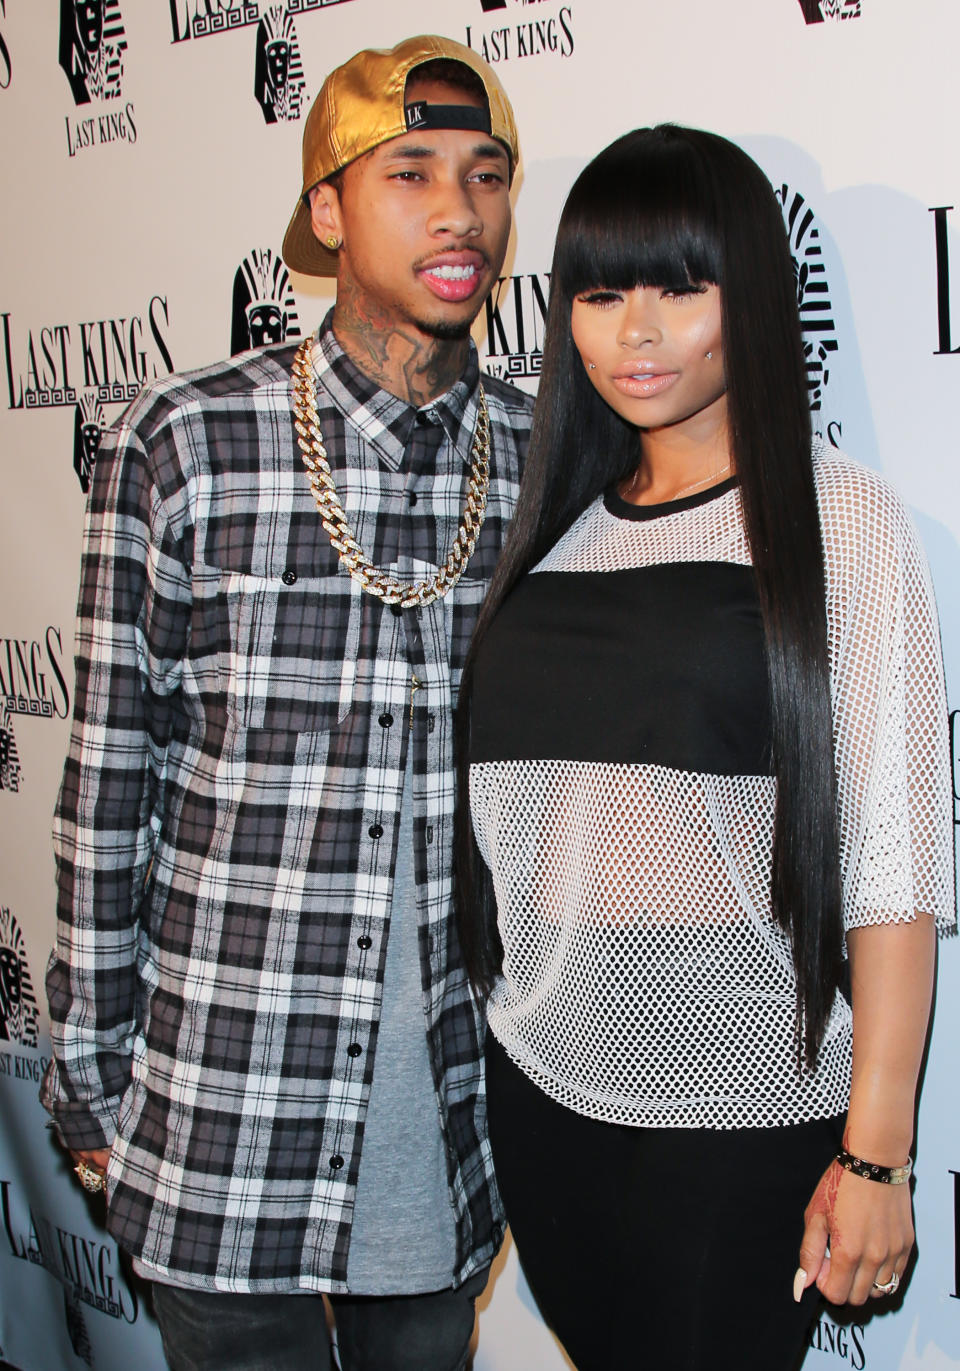 LOS ANGELES, CA - FEBRUARY 20:  Rapper Tyga (L) and Model Blac Chyna (R) attend the press preview at Tyga's "Last Kings" flagship store on February 20, 2014 in Los Angeles, California.  (Photo by Paul Archuleta/FilmMagic)